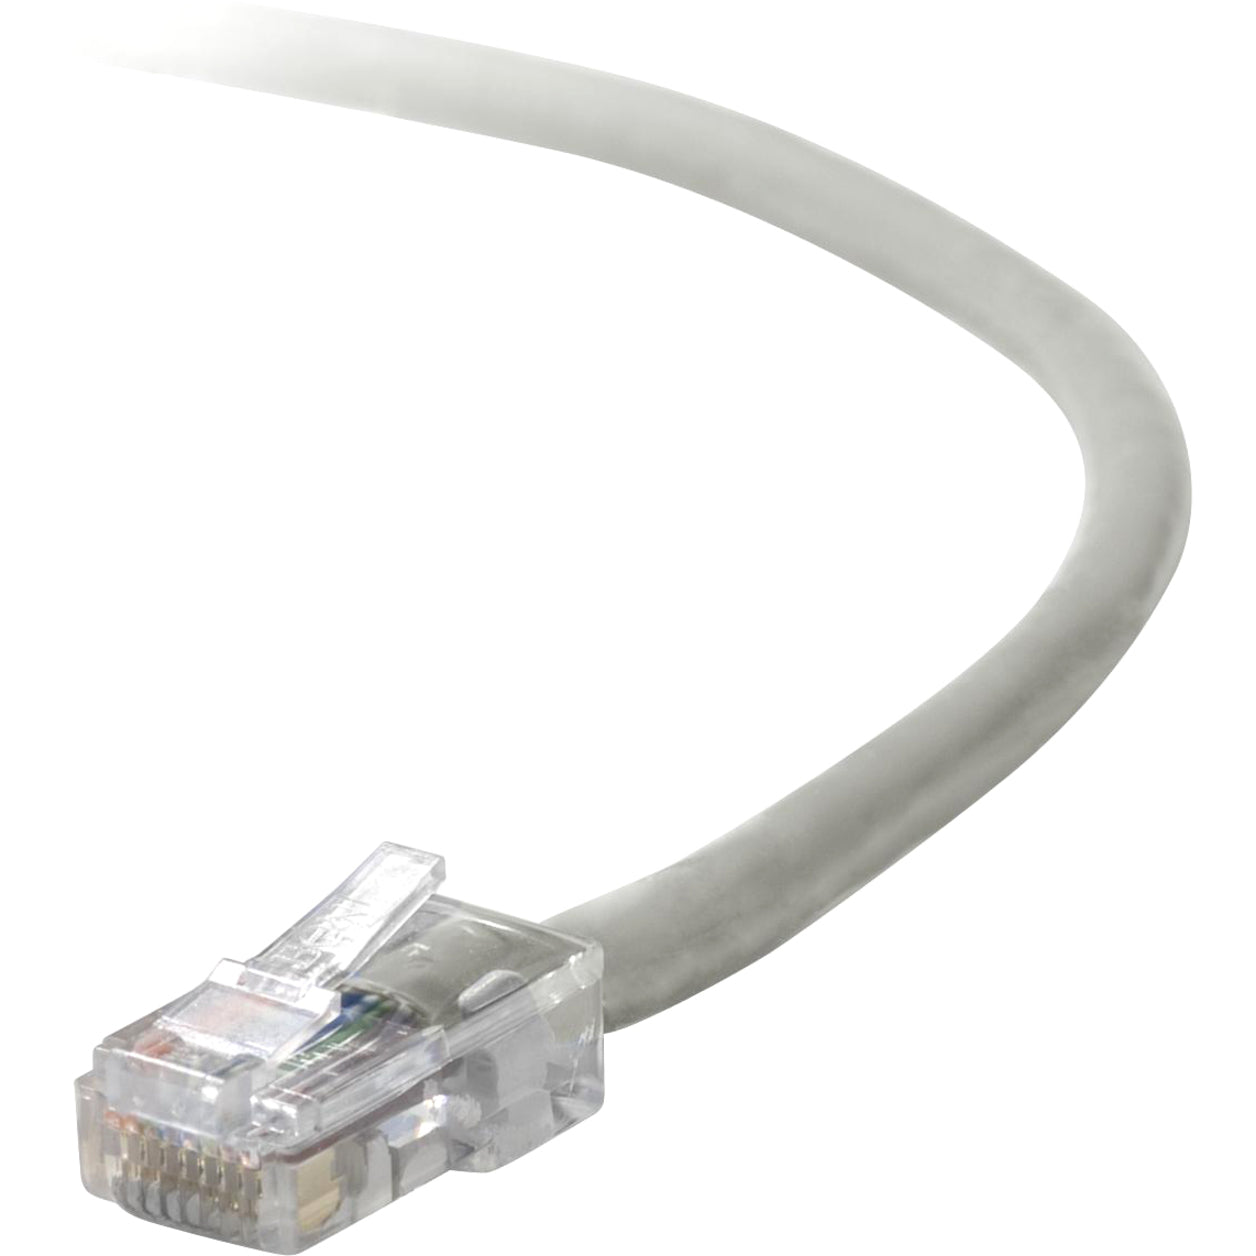 Belkin A3L791B10 RJ45 Category 5e Patch Cable, 10 ft, Copper Conductor, Gray